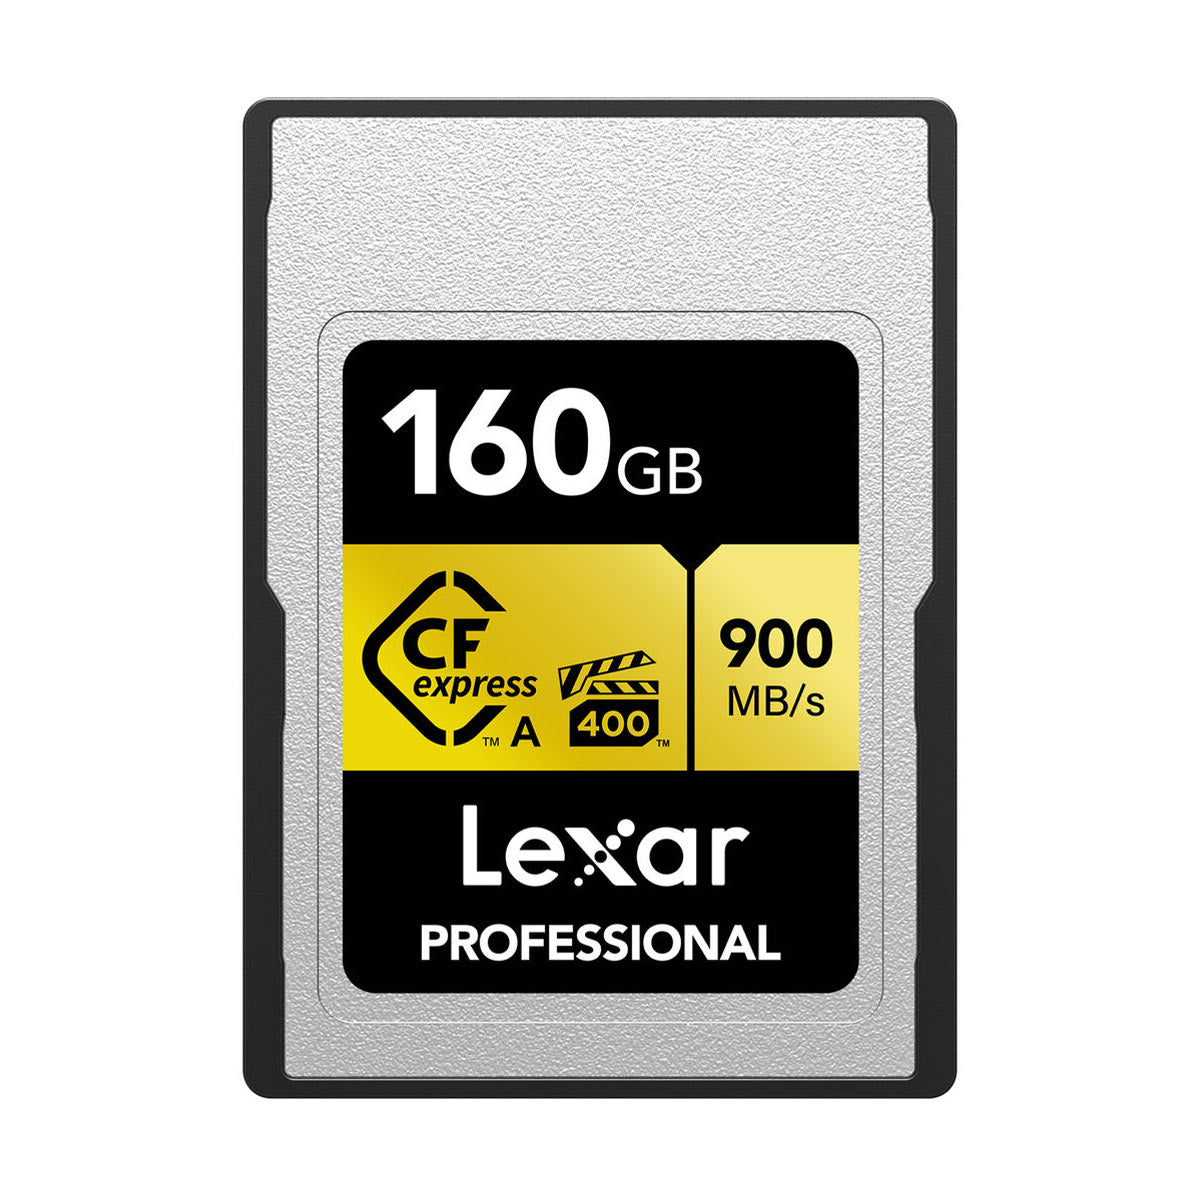 Lexar 160GB Professional CFexpress Type A Memory Card (Gold Series